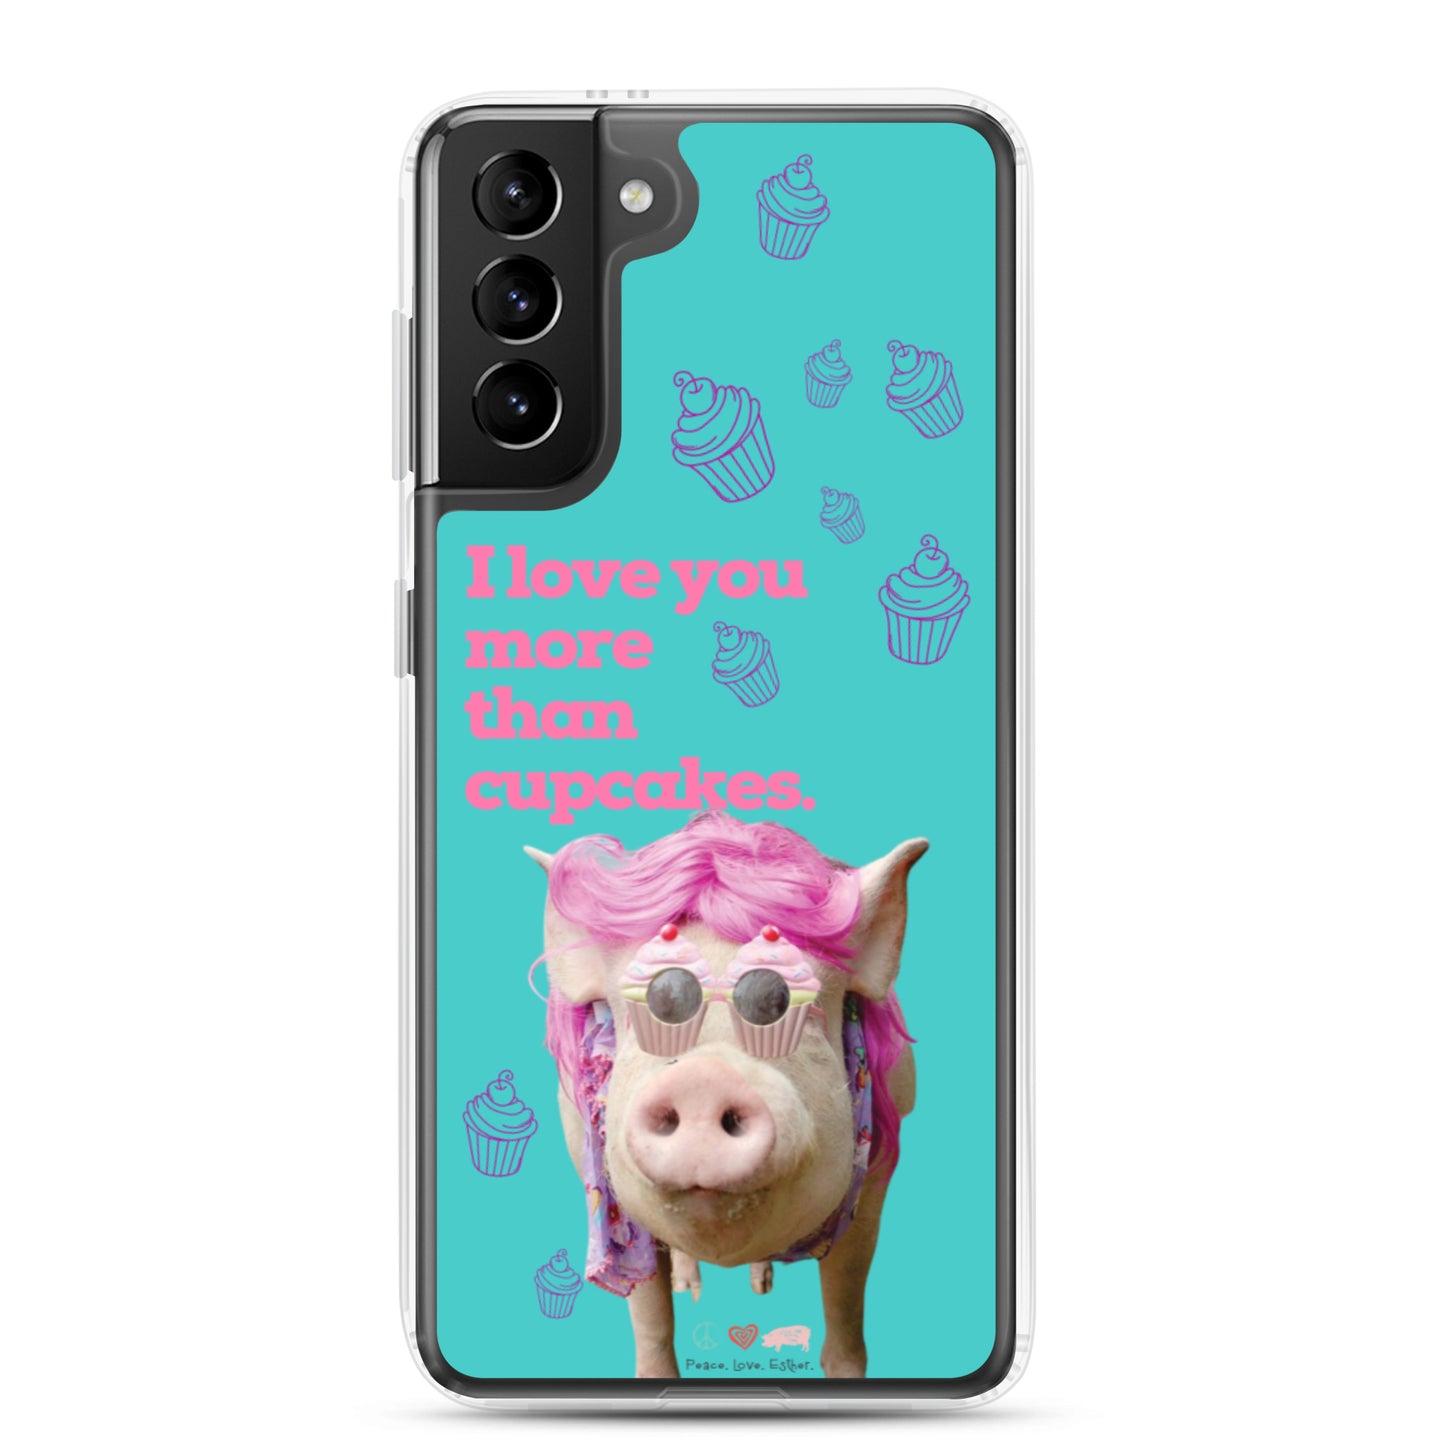 NEW- I love you more than Cupcakes! - Samsung Case